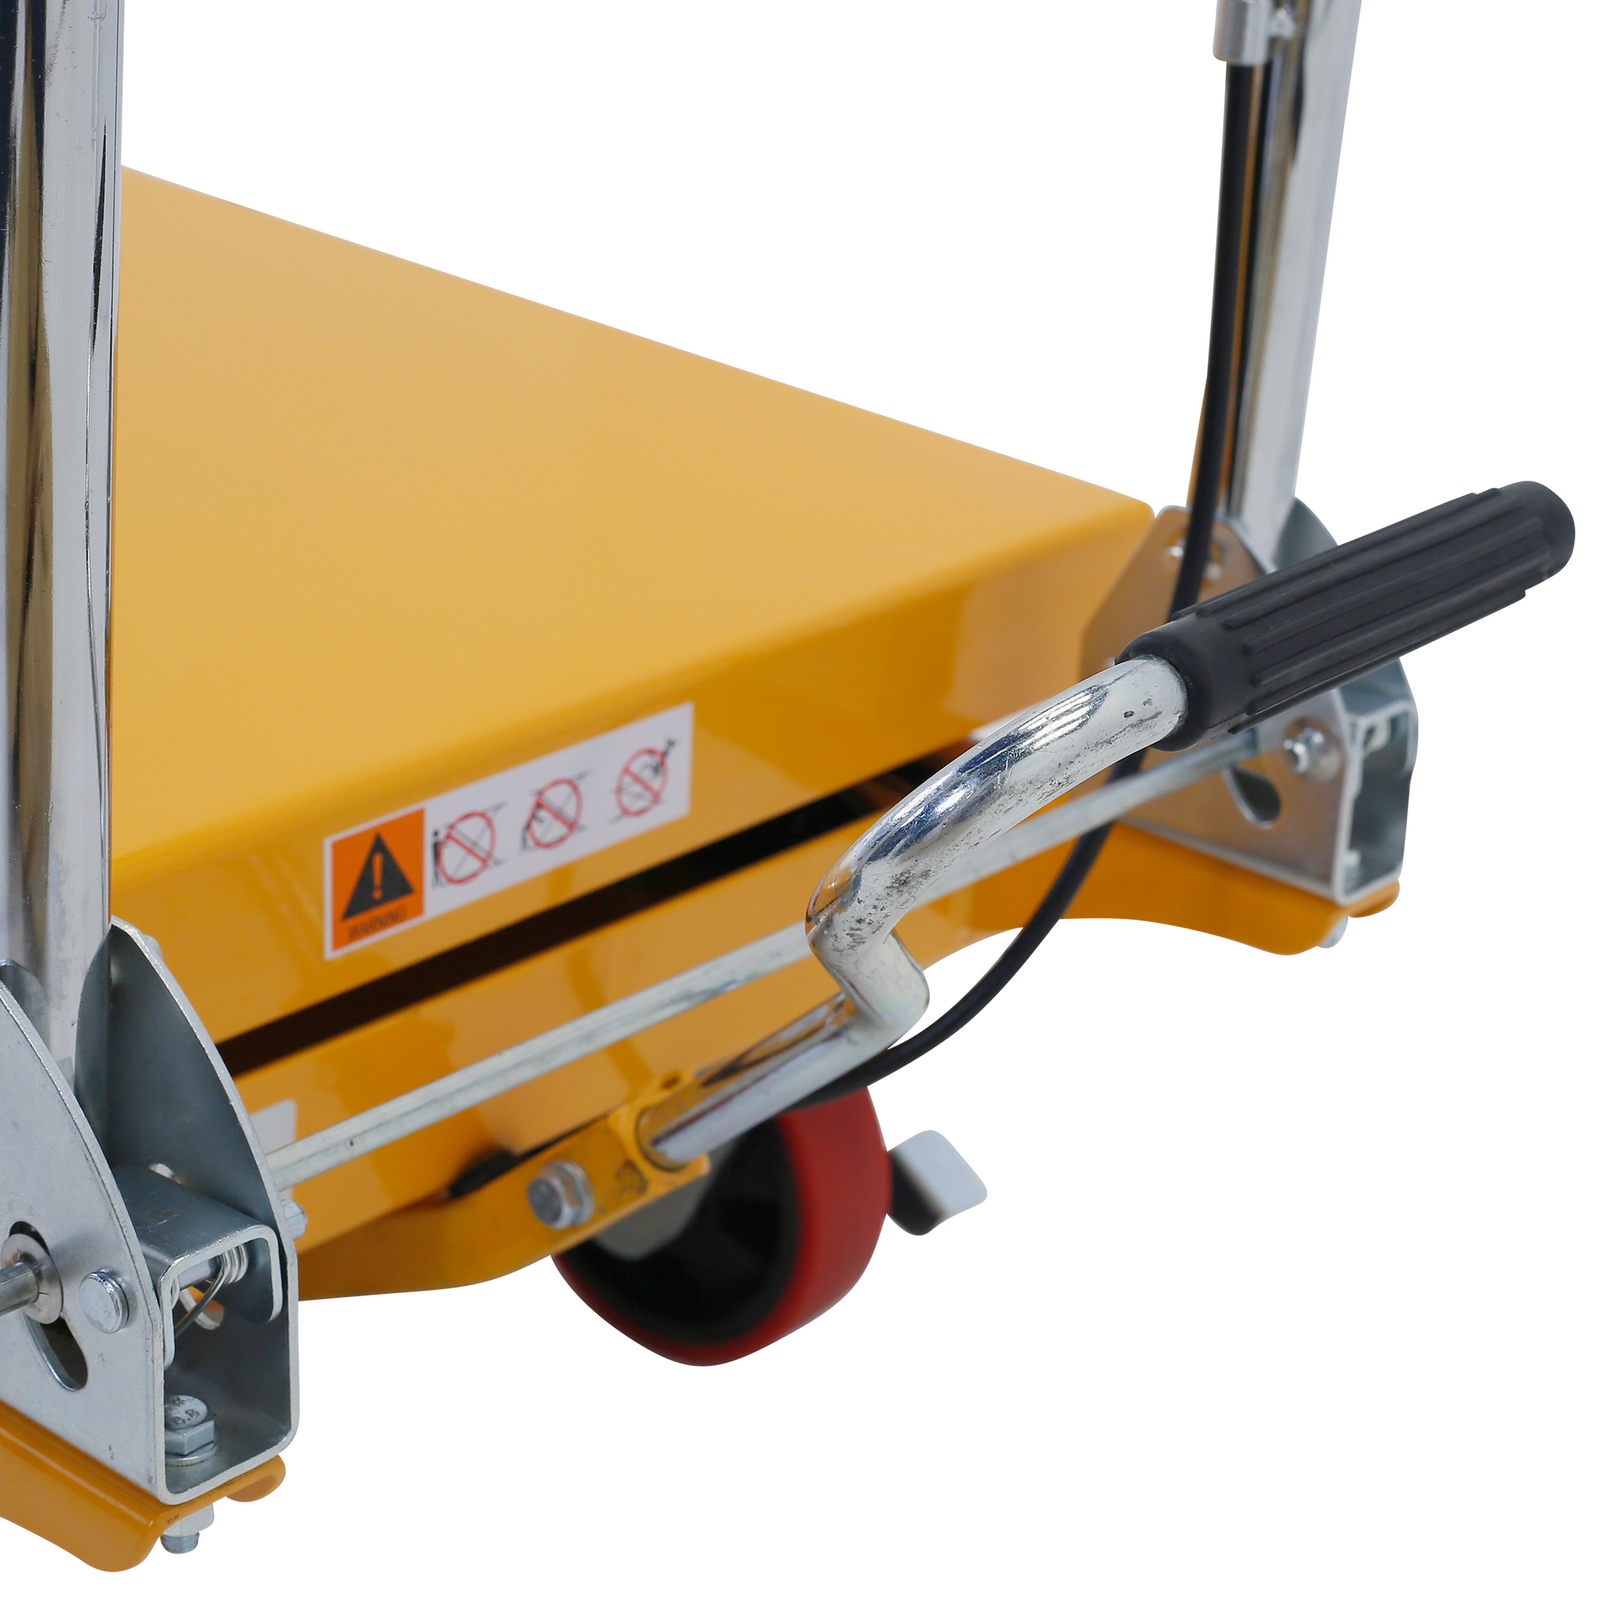 Show the foot pedal that lift the table base of the mobile scissor lift table for 330 LBS from JORES TECHNOLOGIES®. Also one of the red wheel with brakes can be seen.